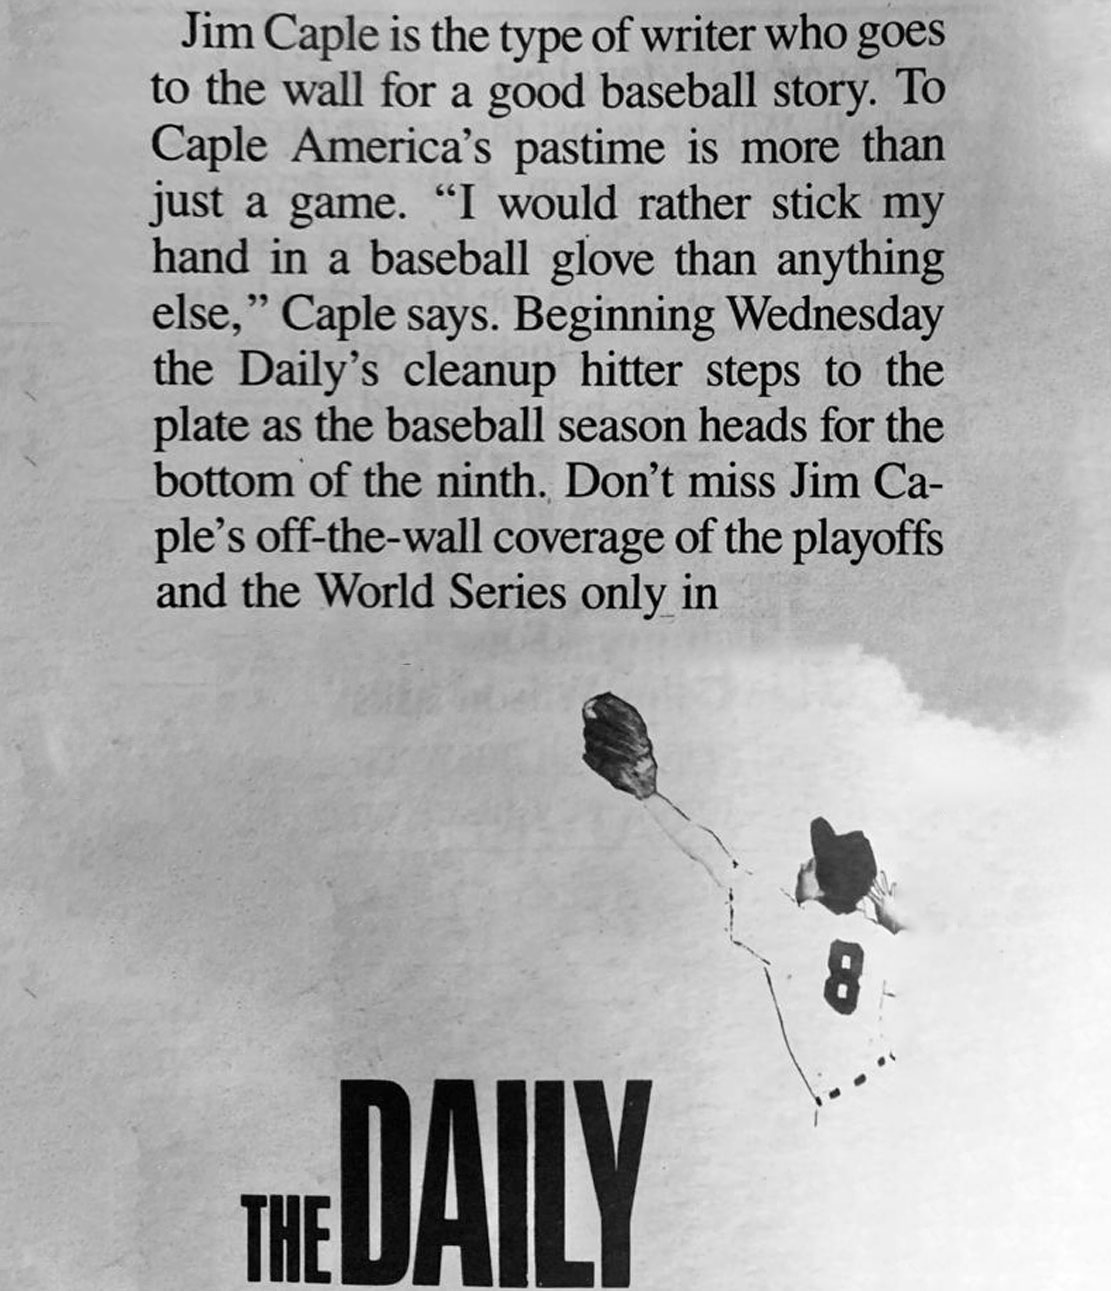 A newspaper ad for Jim Caple's column in the Daily, reading: "Don't miss Jim Caple's off-the-wall coverage of the playoffs and World Series."